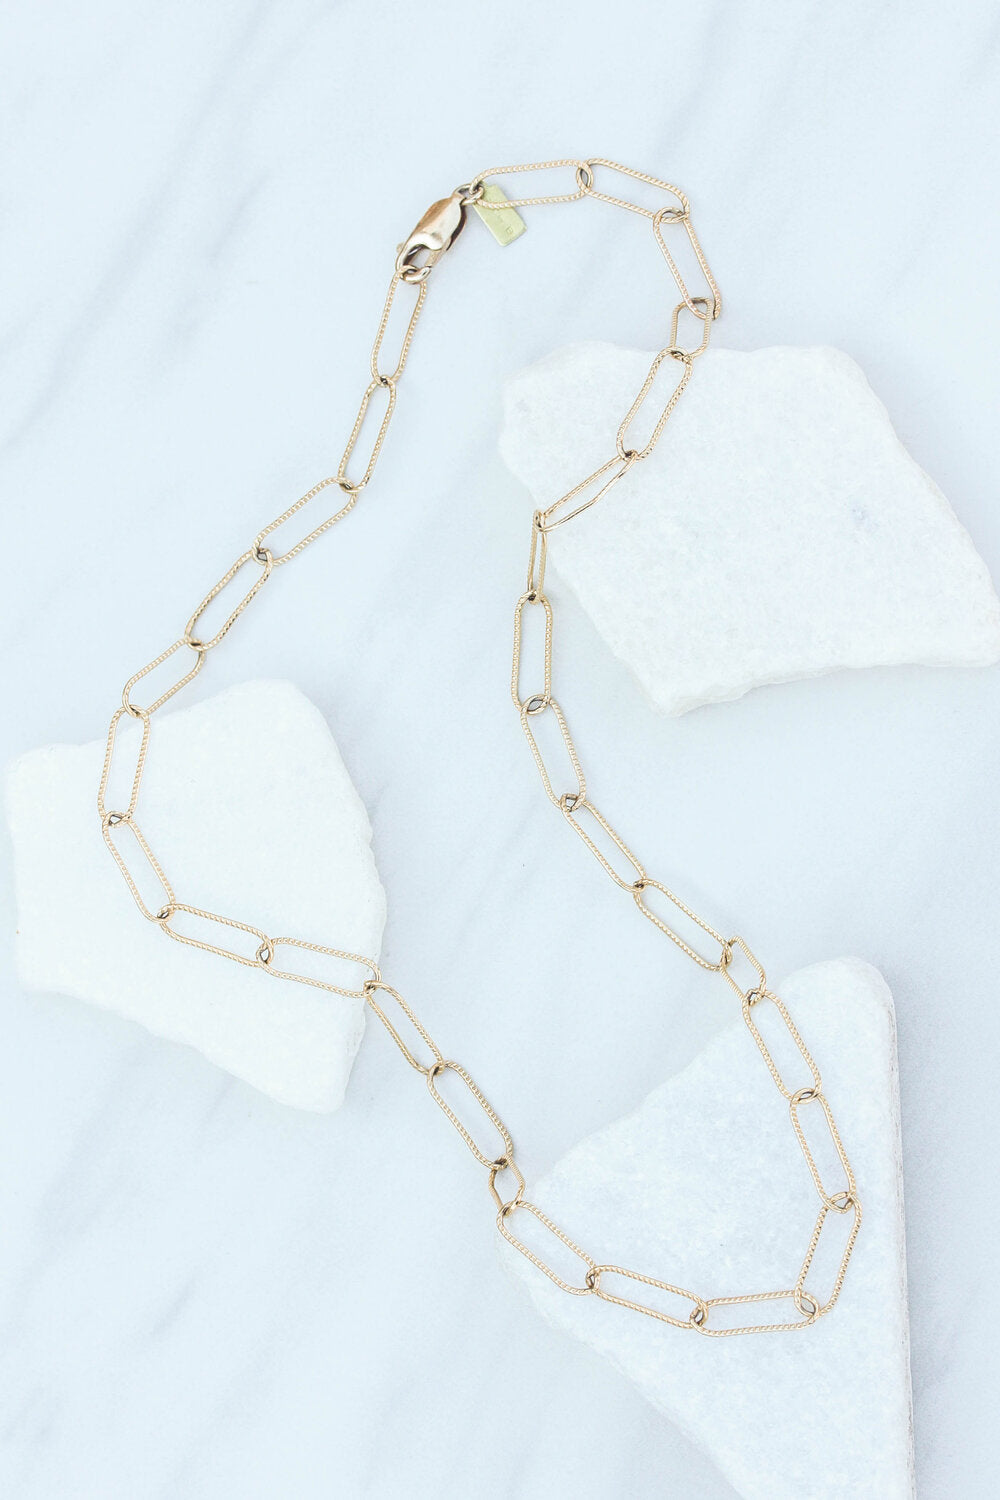 Bold Paperclip Chain Necklace - Versatile & Chic | Sincerely Chain Co.